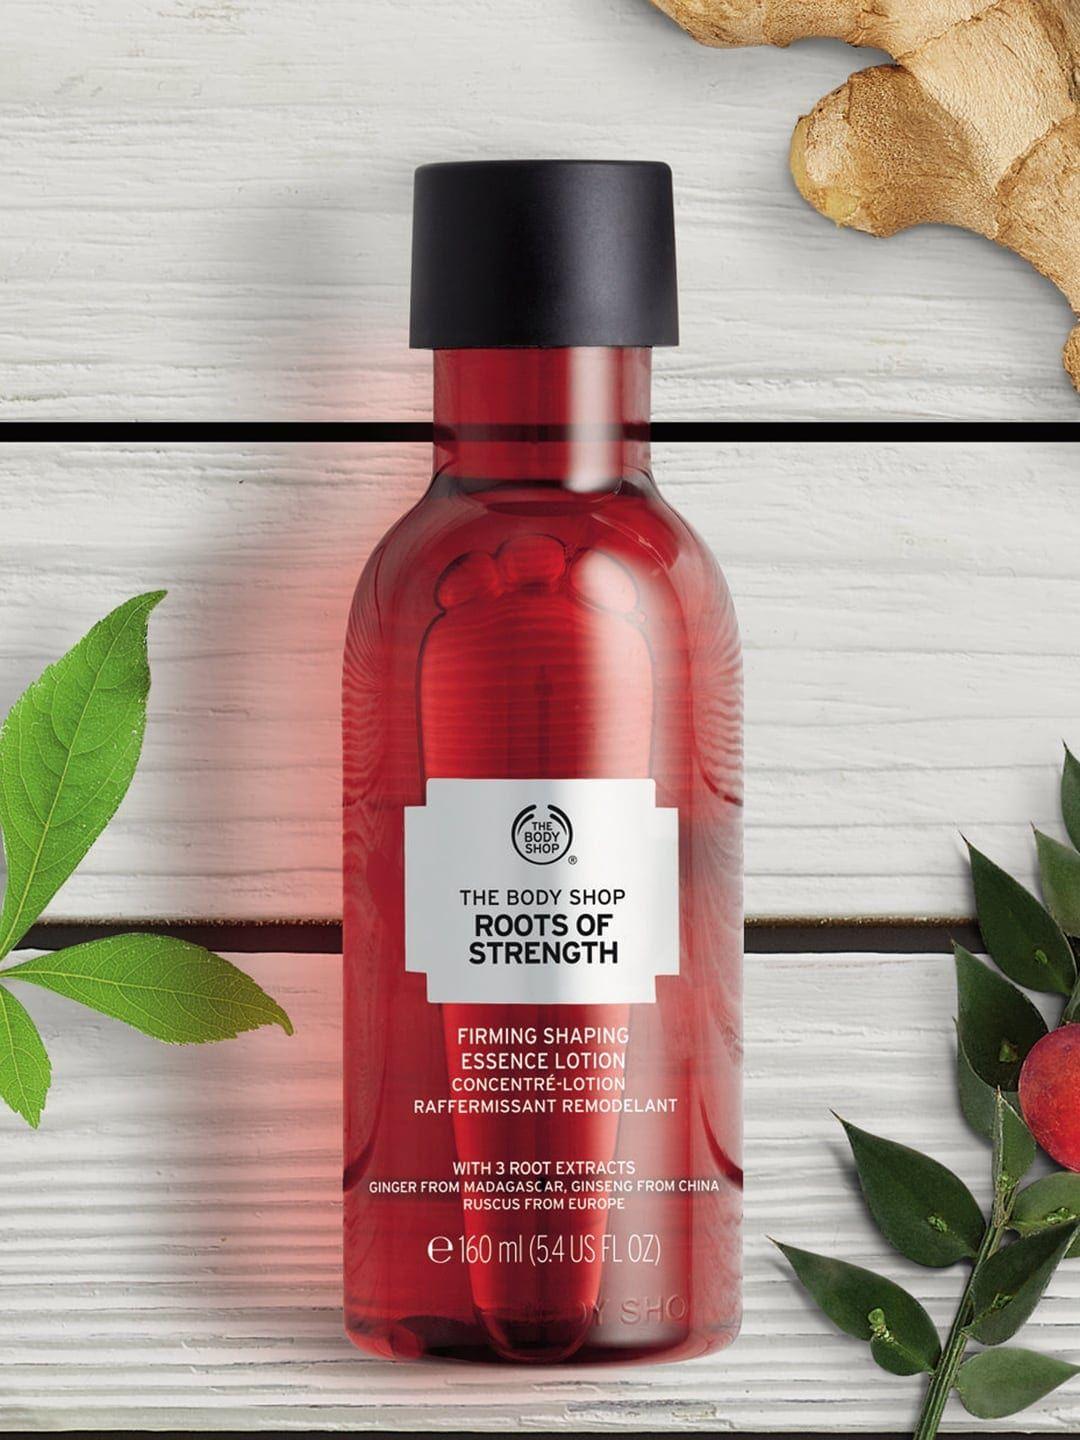 the body shop roots of strength firming shaping sustainable essence lotion 160ml